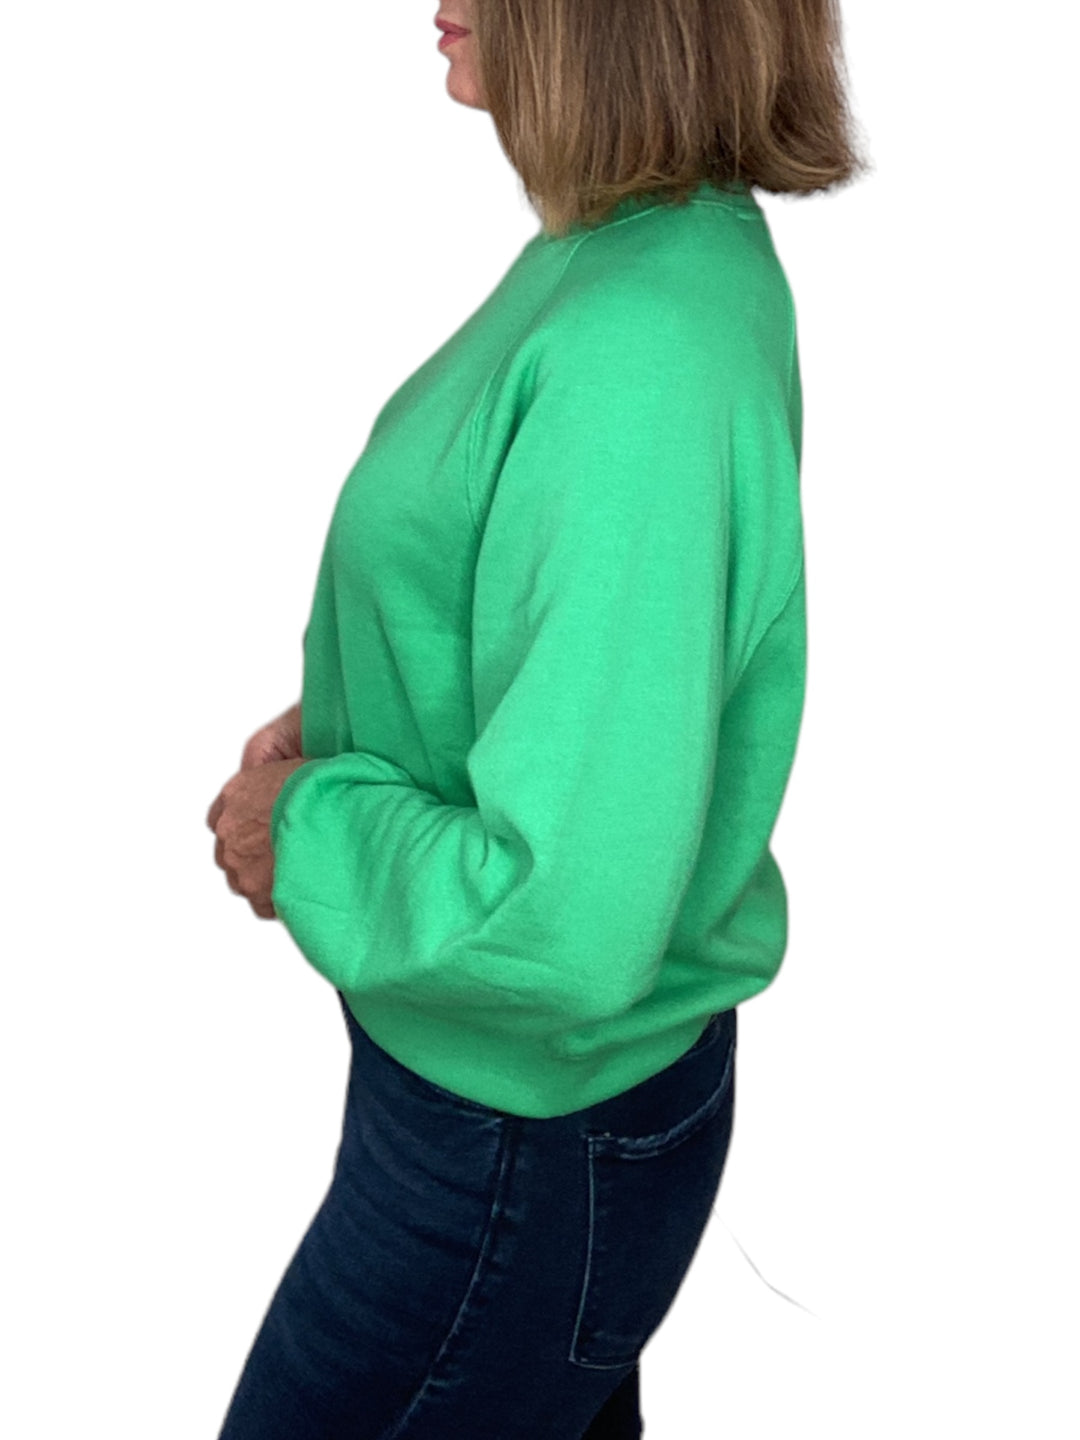 CREW NECK SWEATSHIRT W/ EMBROIDERED SMILEY FACE-GREEN - Kingfisher Road - Online Boutique